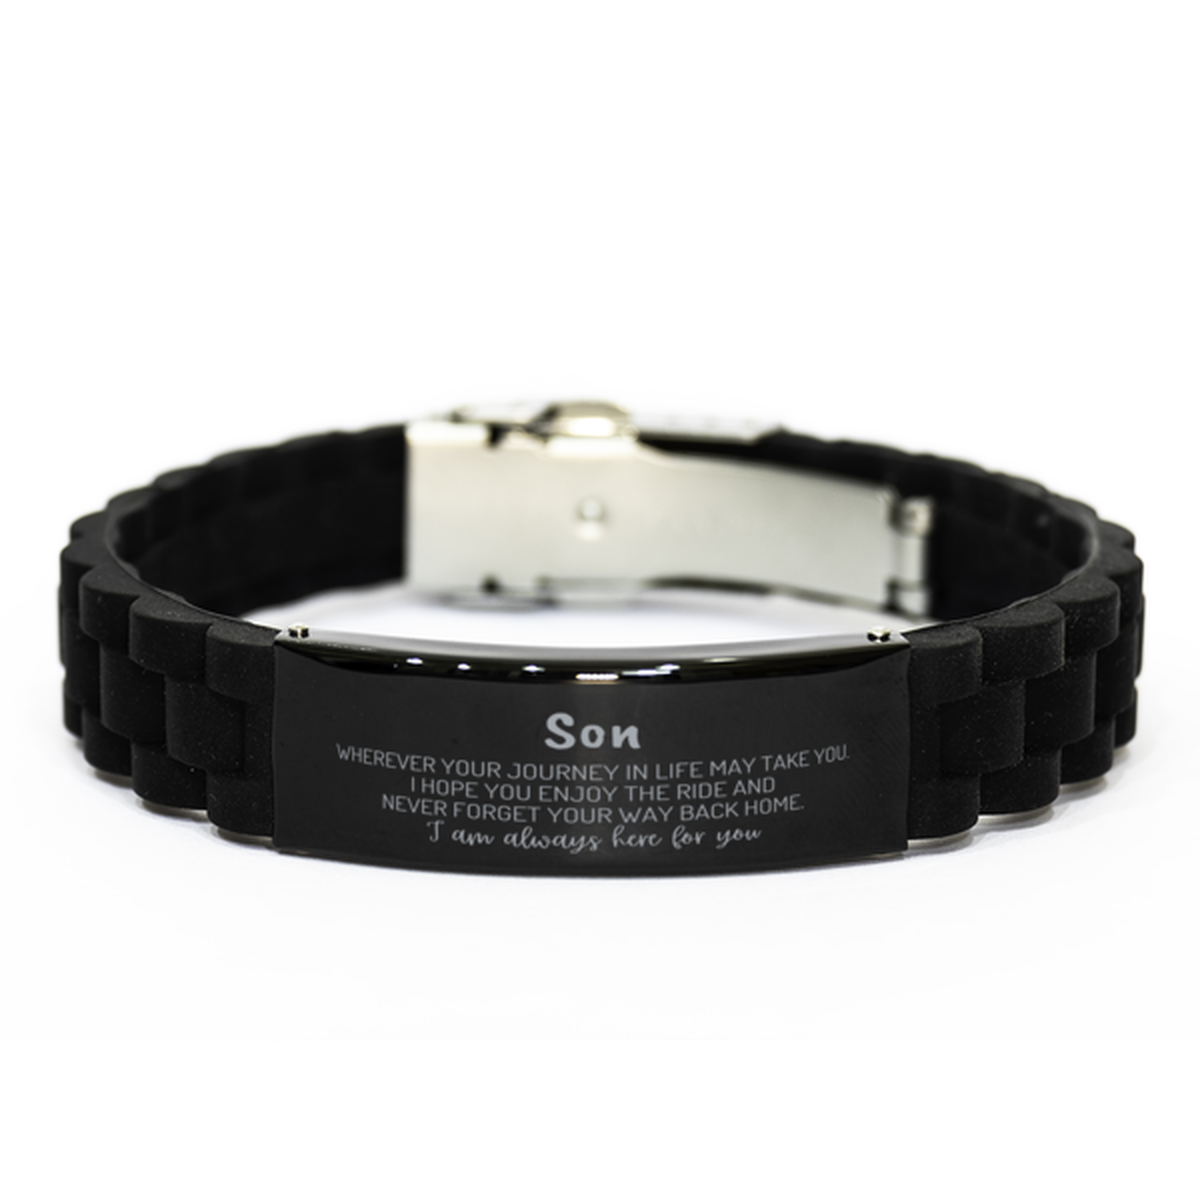 Son wherever your journey in life may take you, I am always here for you Son Black Glidelock Clasp Bracelet, Awesome Christmas Gifts For Son, Son Birthday Gifts for Men Women Family Loved One